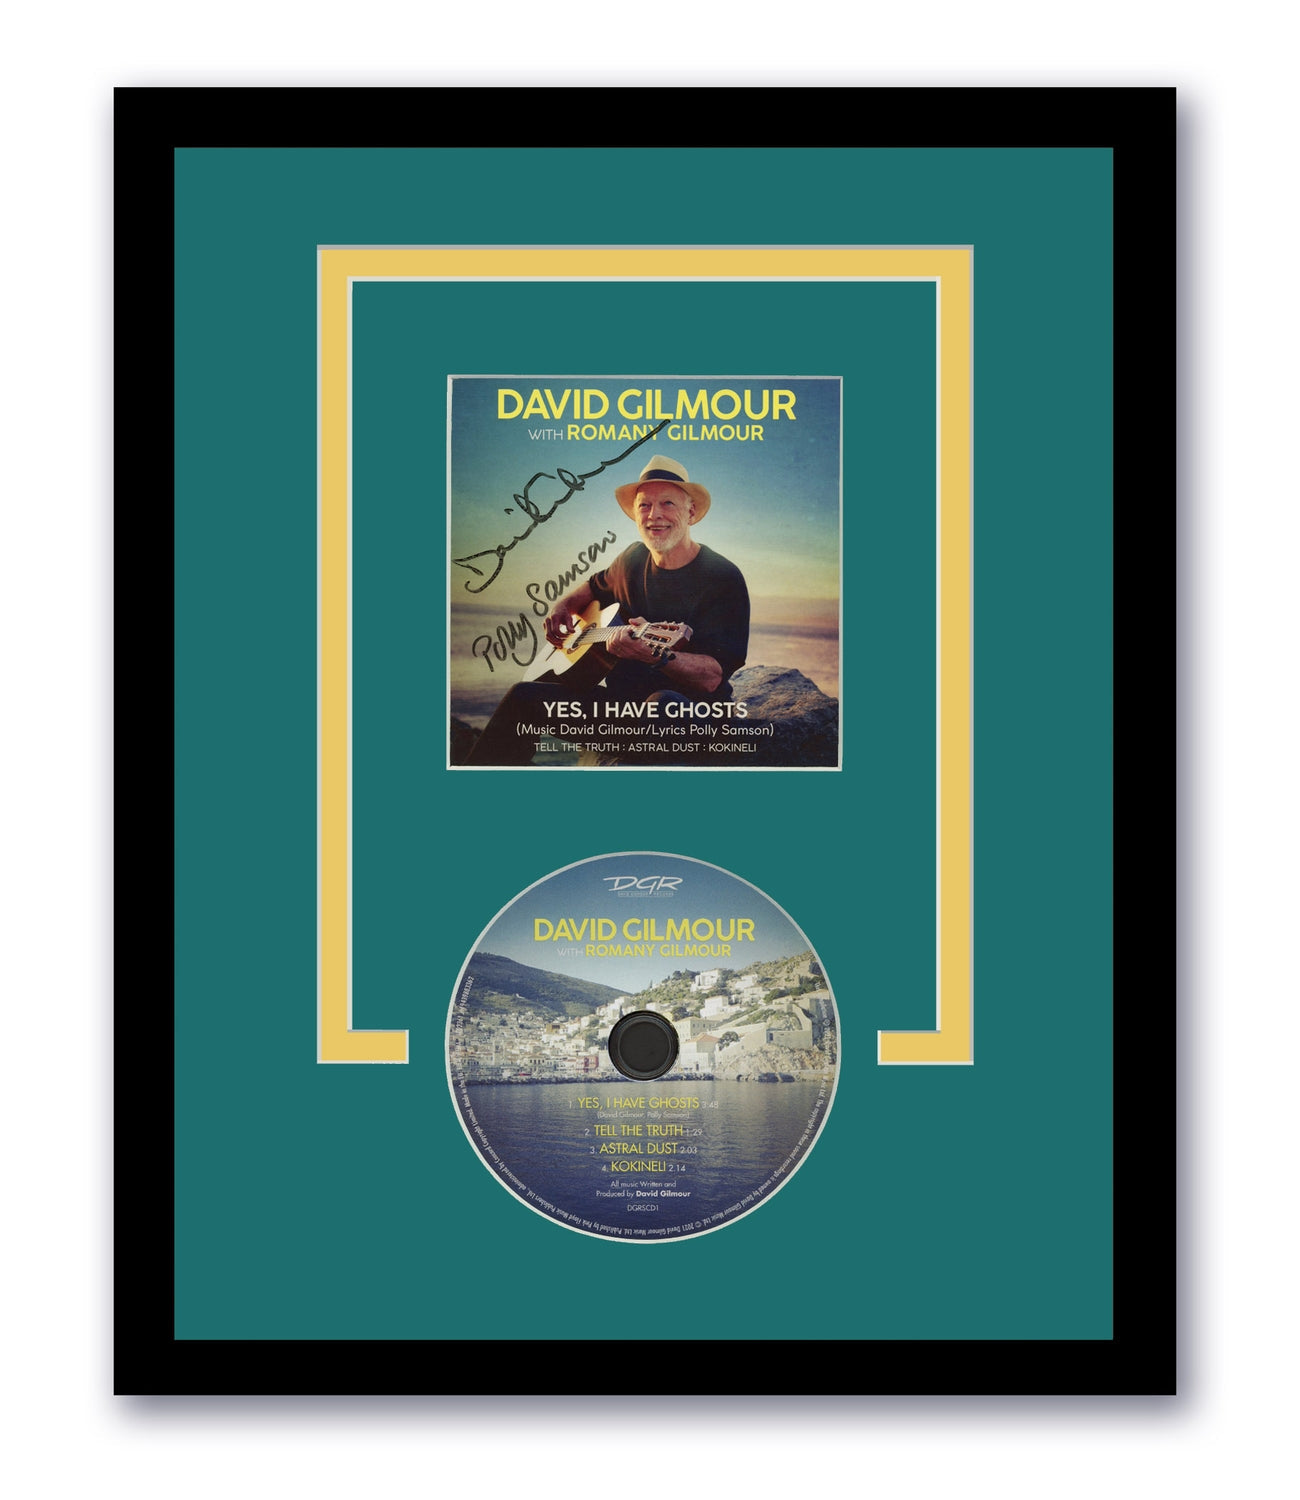 David Gilmour Autographed 11x14 Framed CD Pink Floyd Yes, I Have Ghosts ACOA